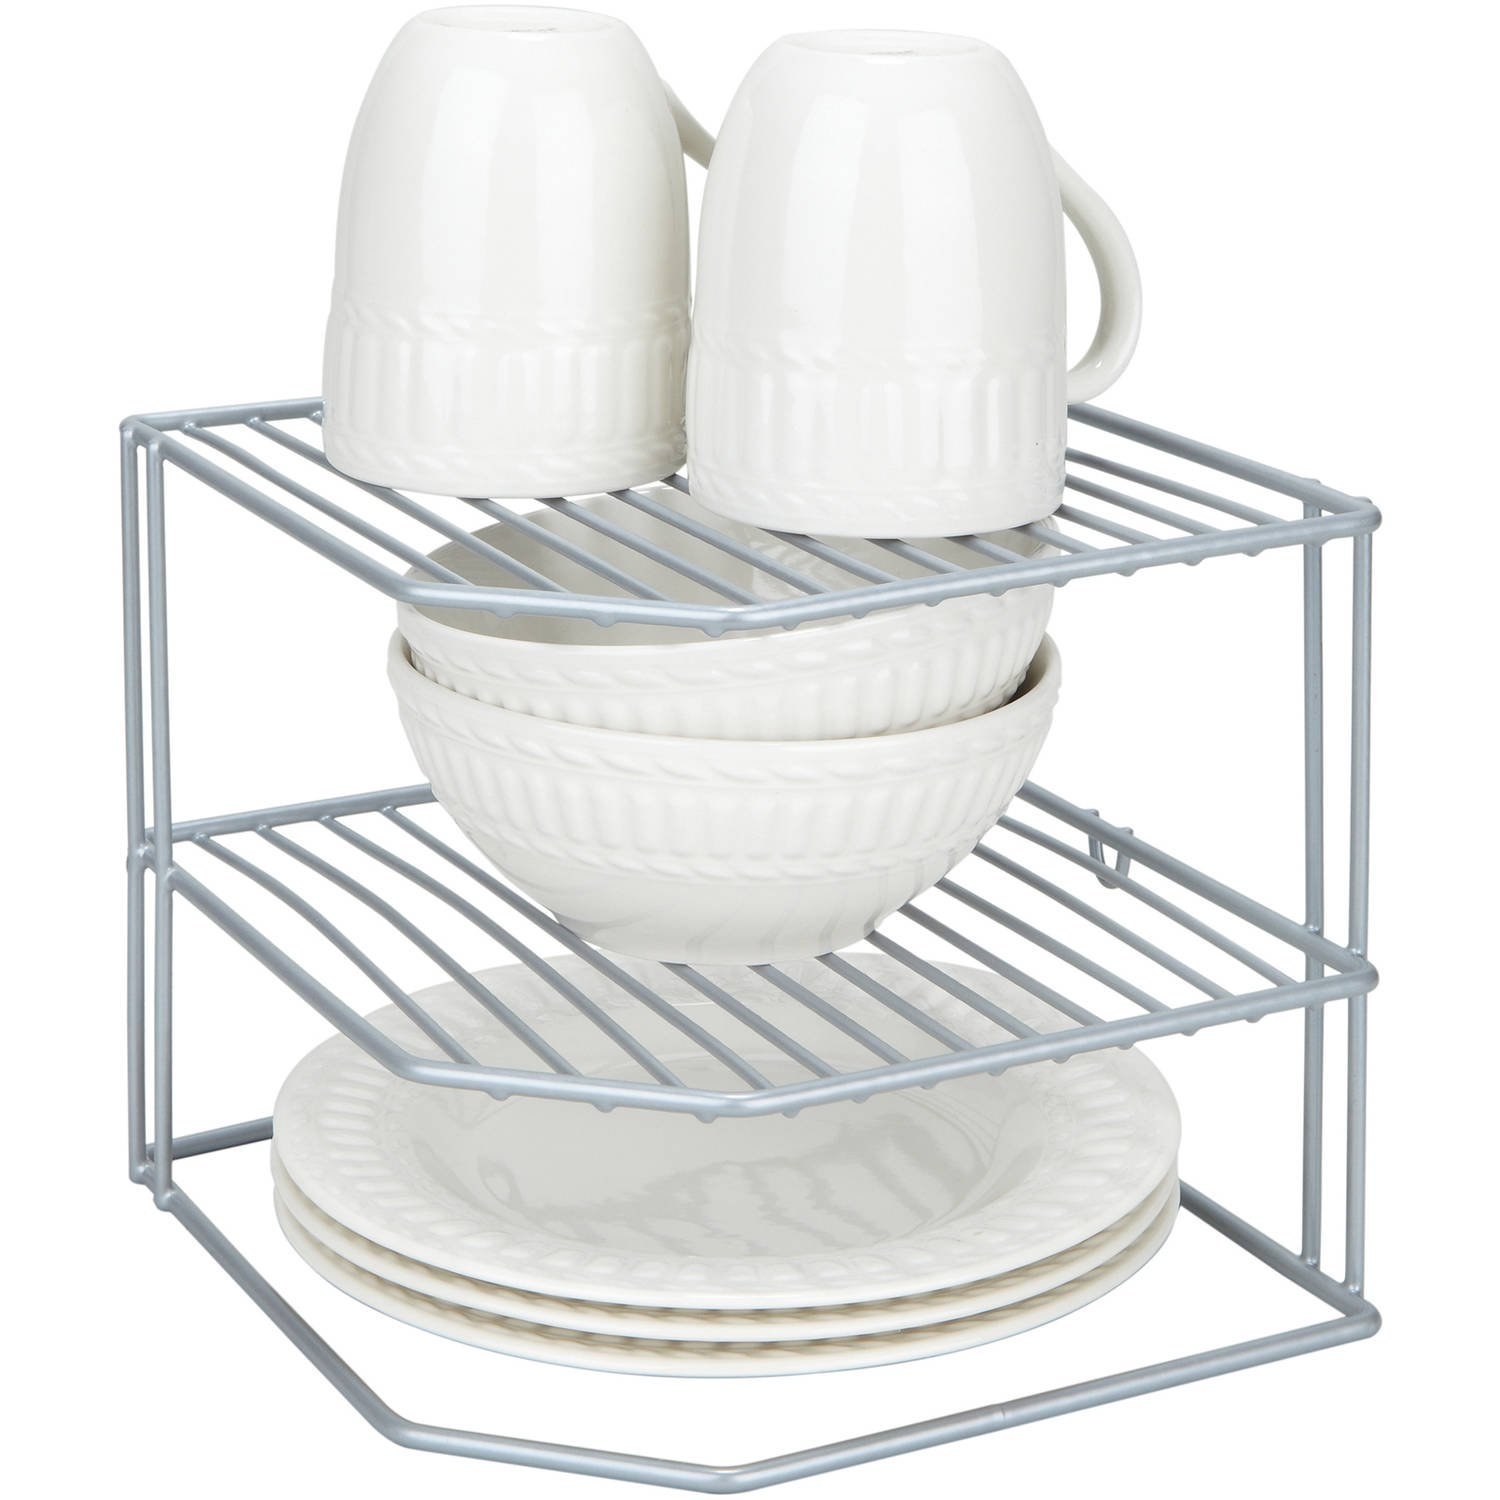 the silver organizer with white dishes